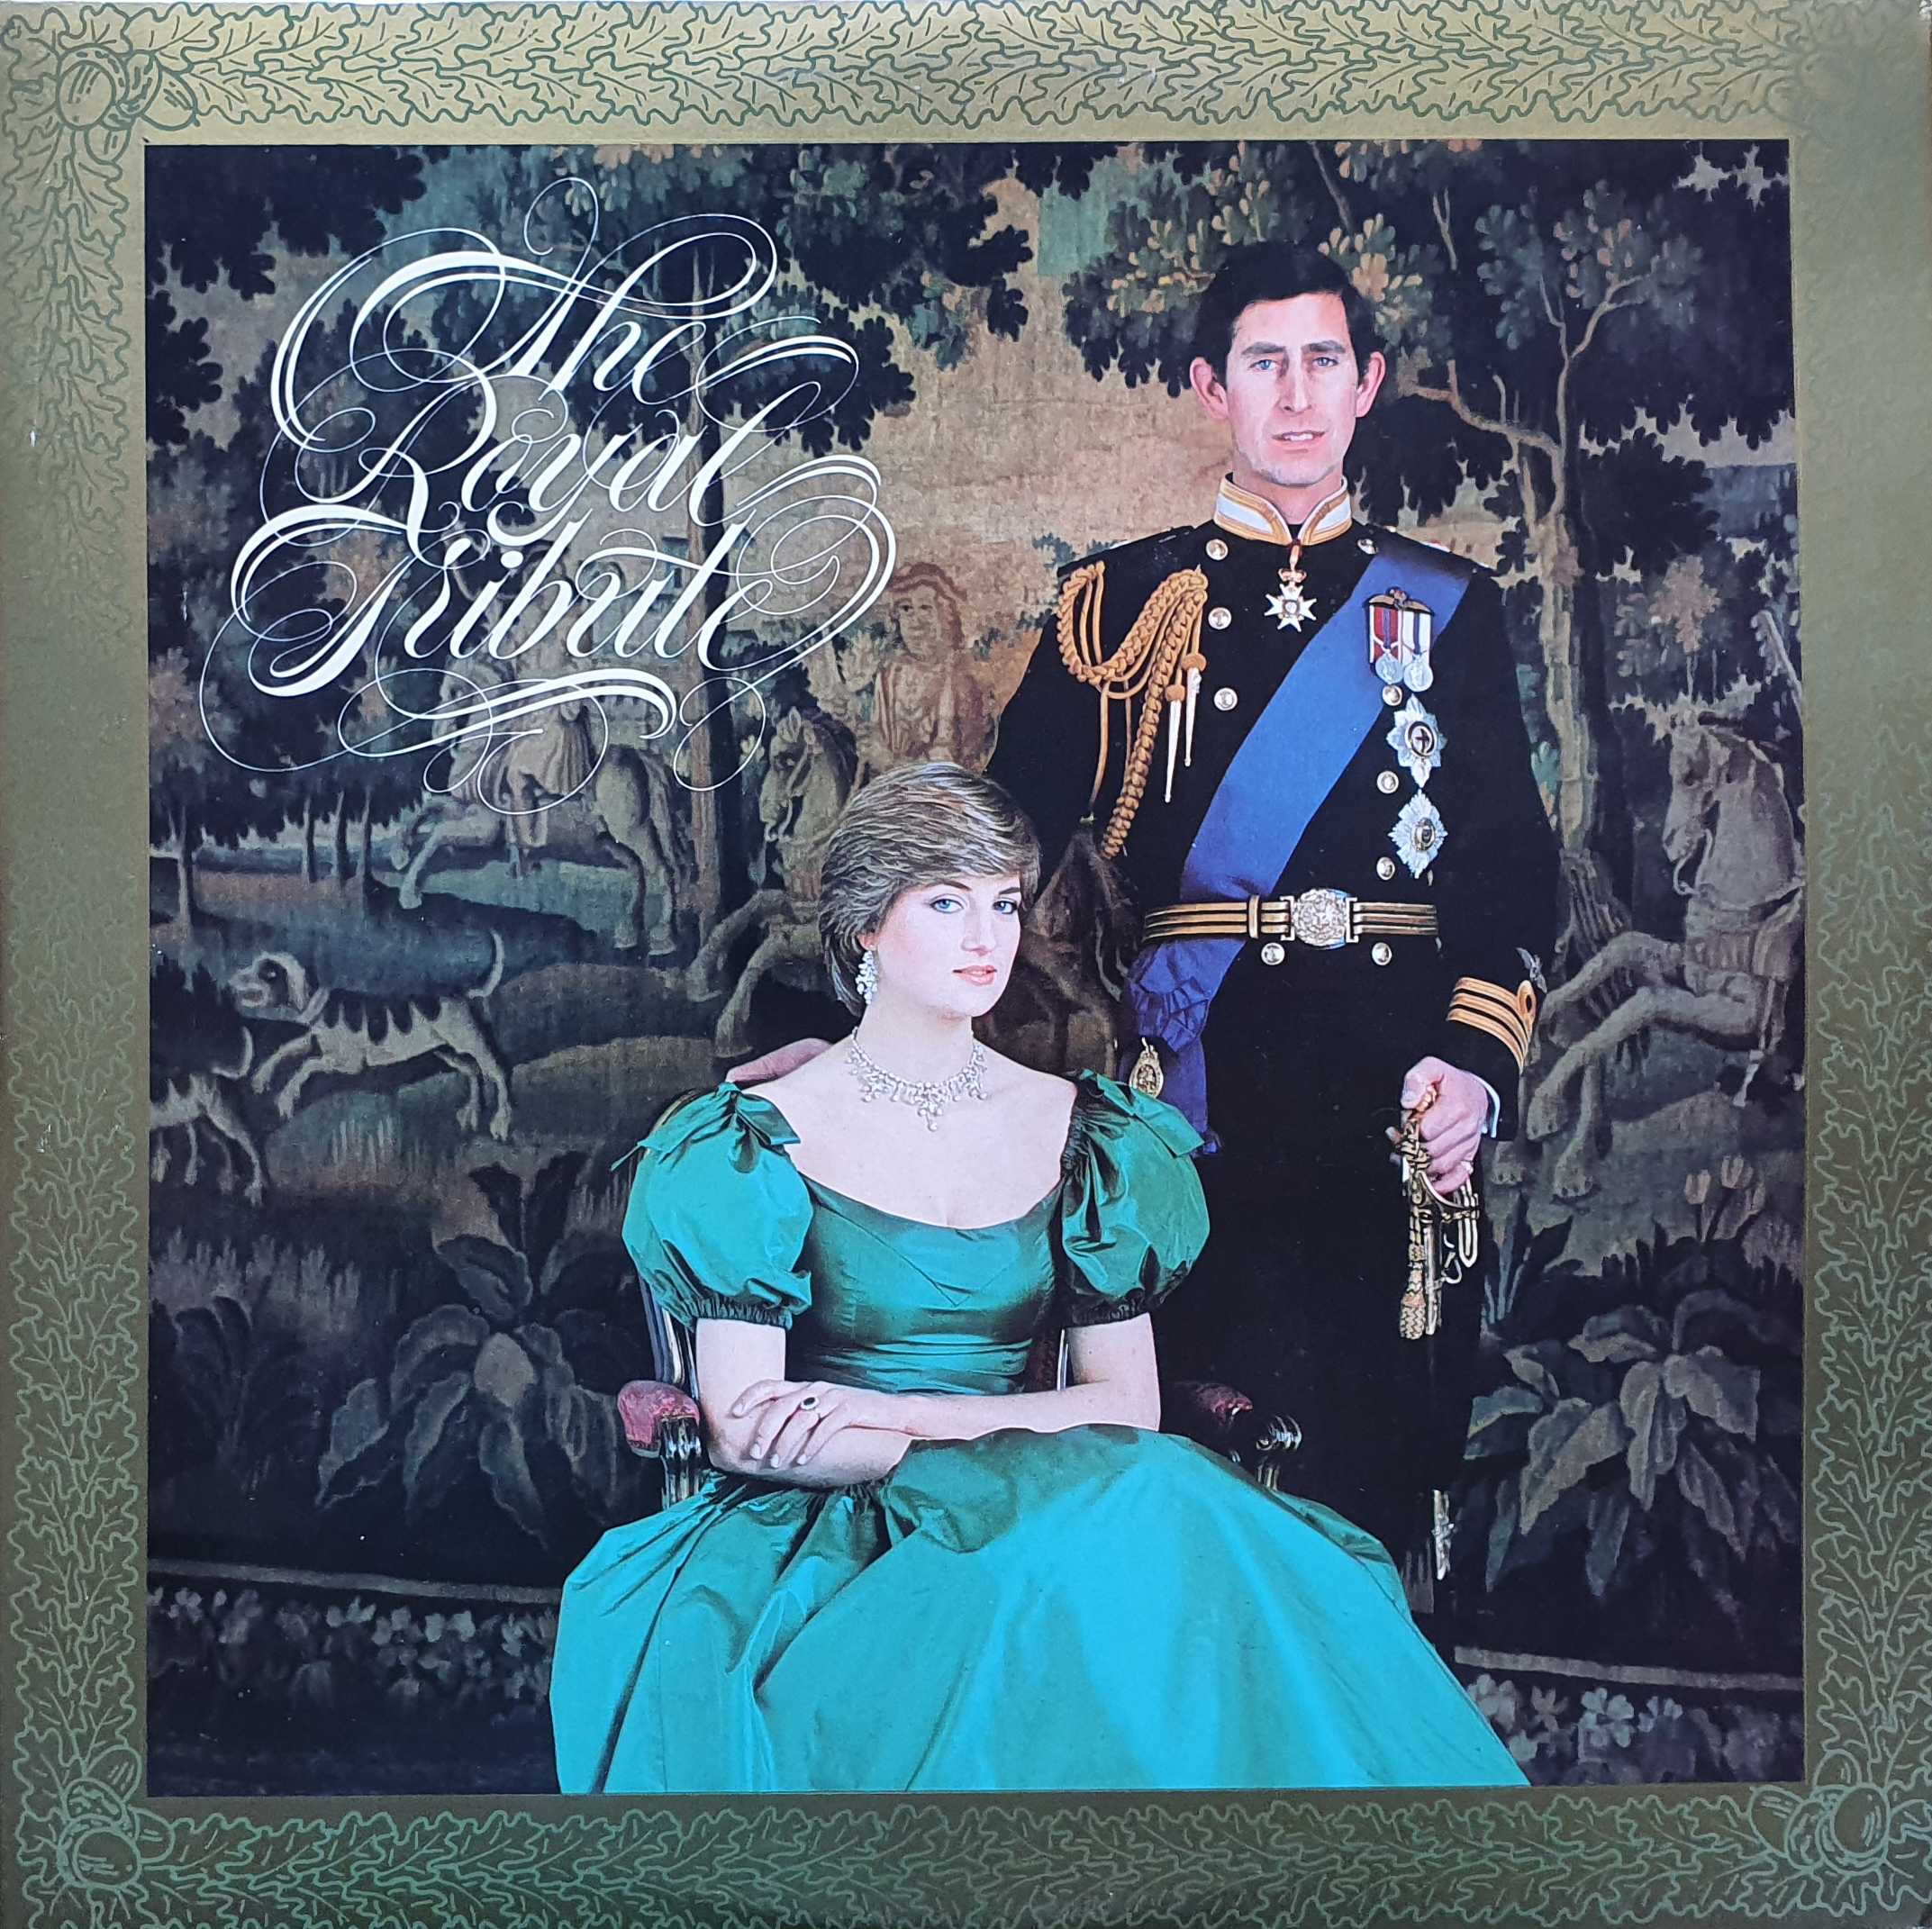 Picture of C2 37655 The royal wedding - Prince Charles / Diana Spencer by artist Various from the BBC albums - Records and Tapes library